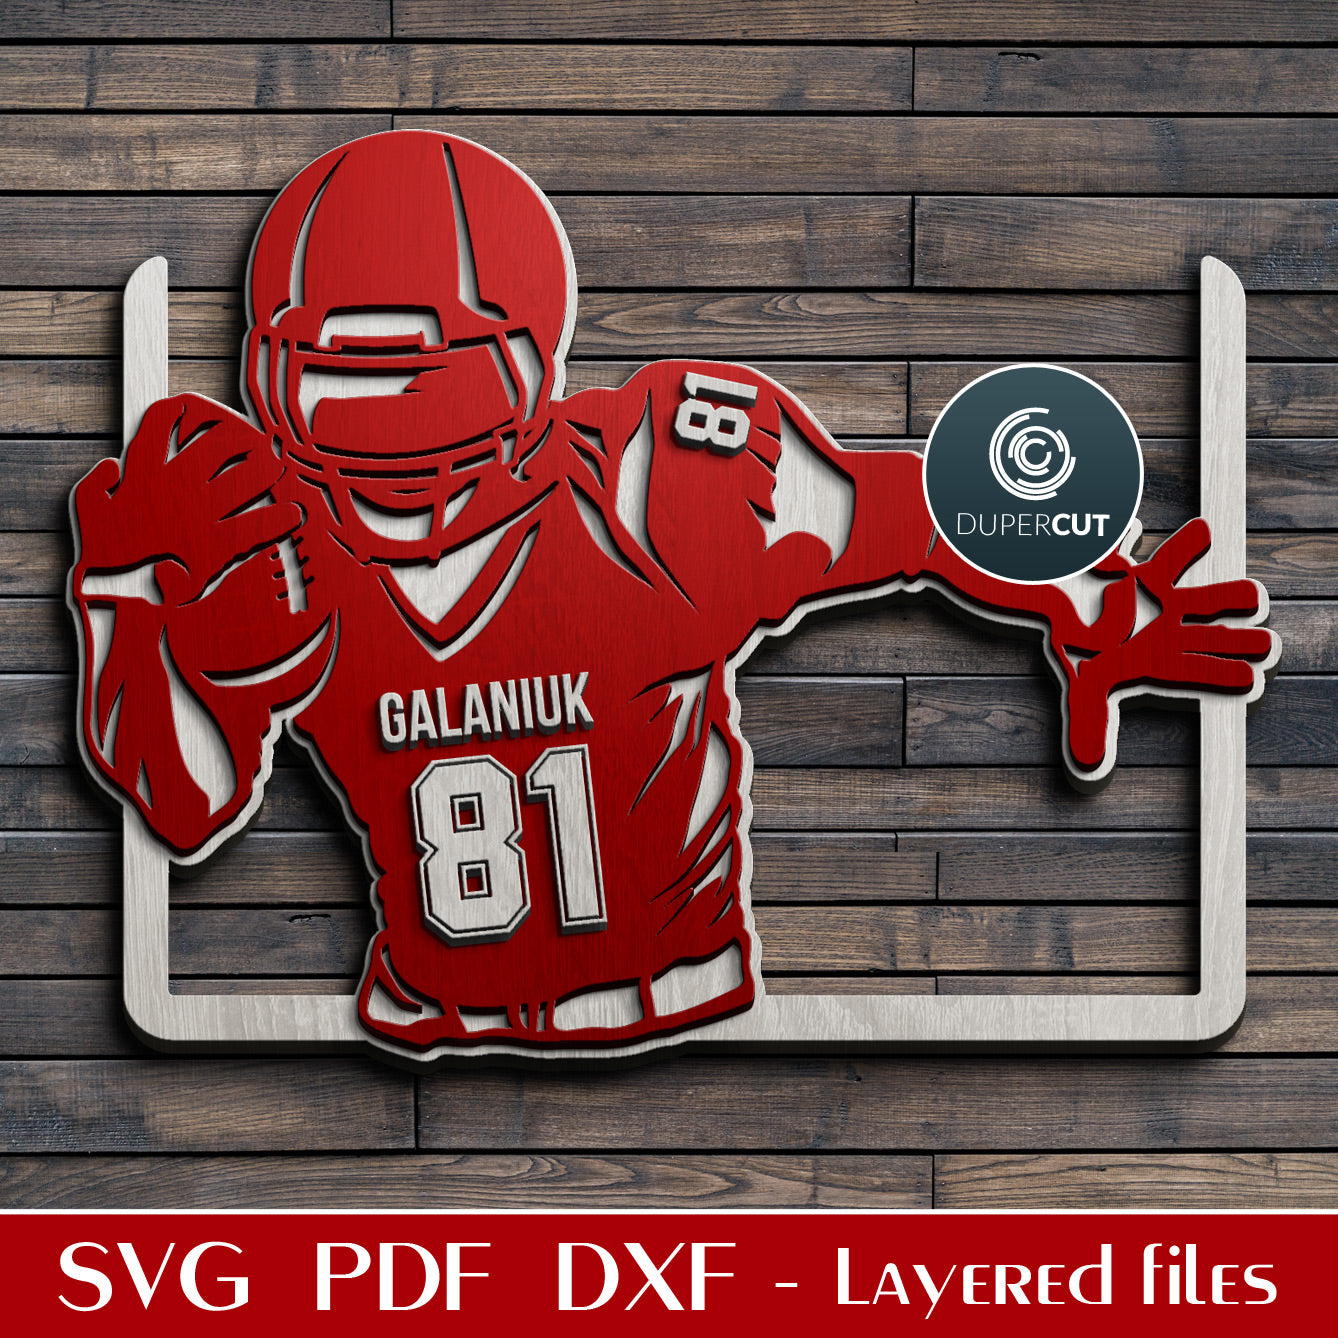 American football sign editable custom jersey name - SVG DXF EPS layered cutting files for Glowforge, Cricut, Silhouette Cameo, CNC plasma machines, scroll saw pattern by www.DuperCut.com